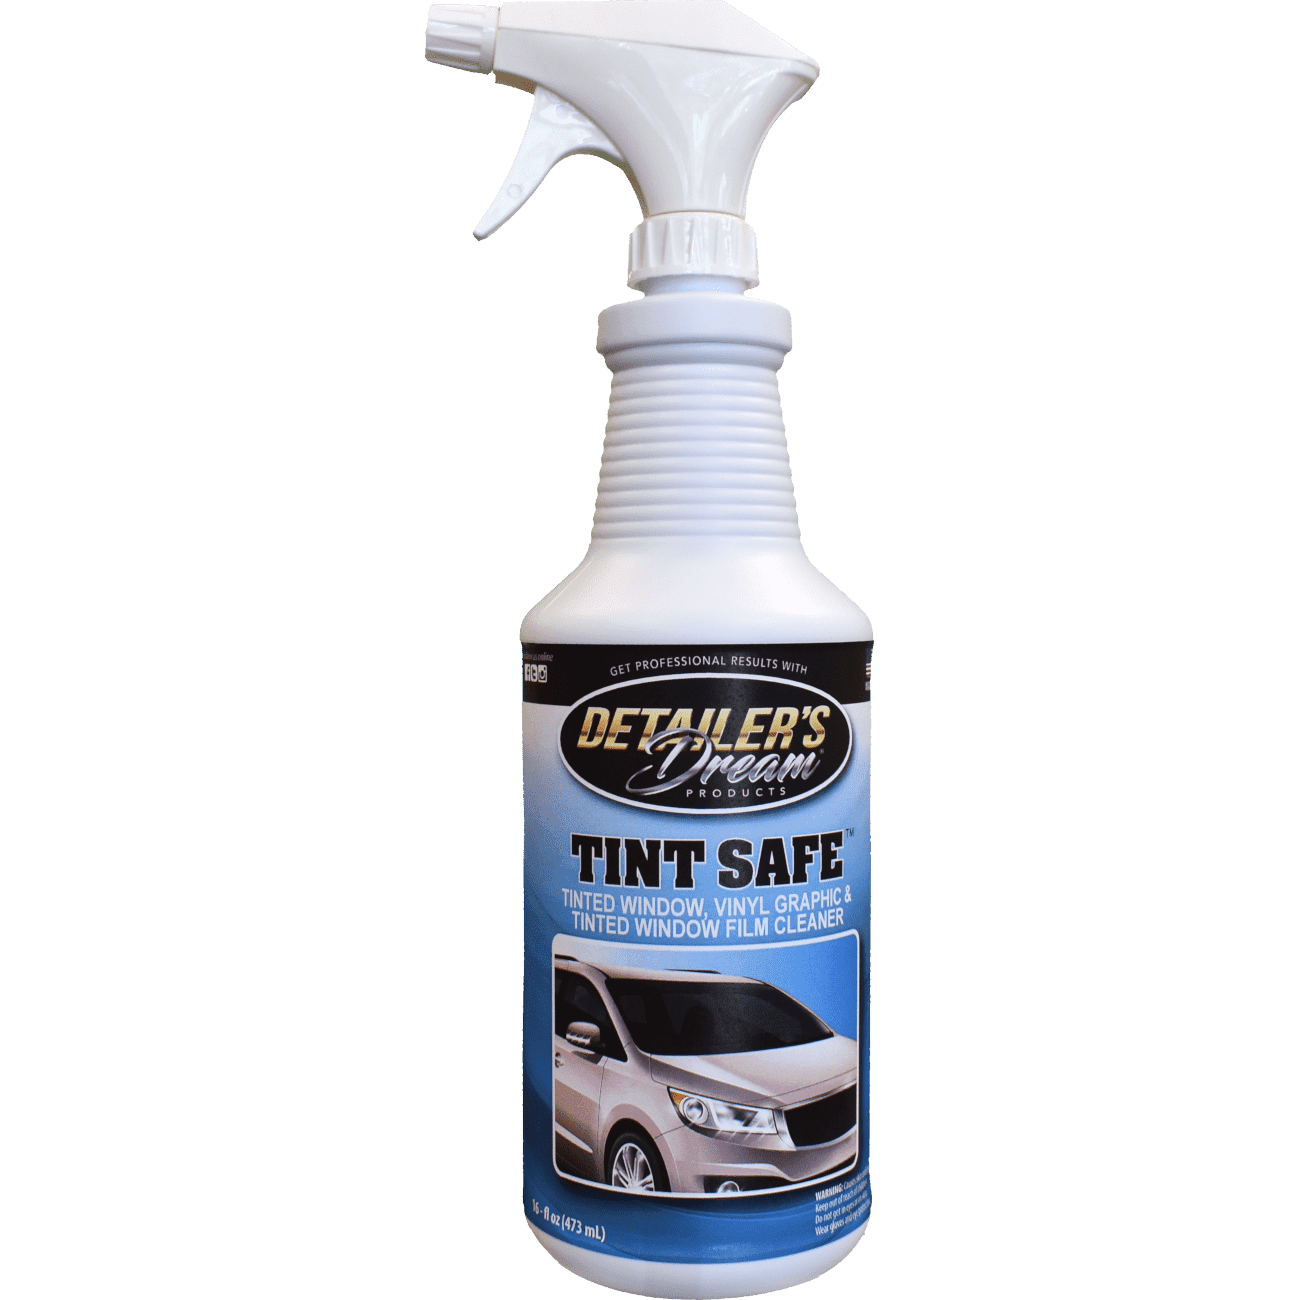 Cleaning Tinted Car Windows, Car Care Products